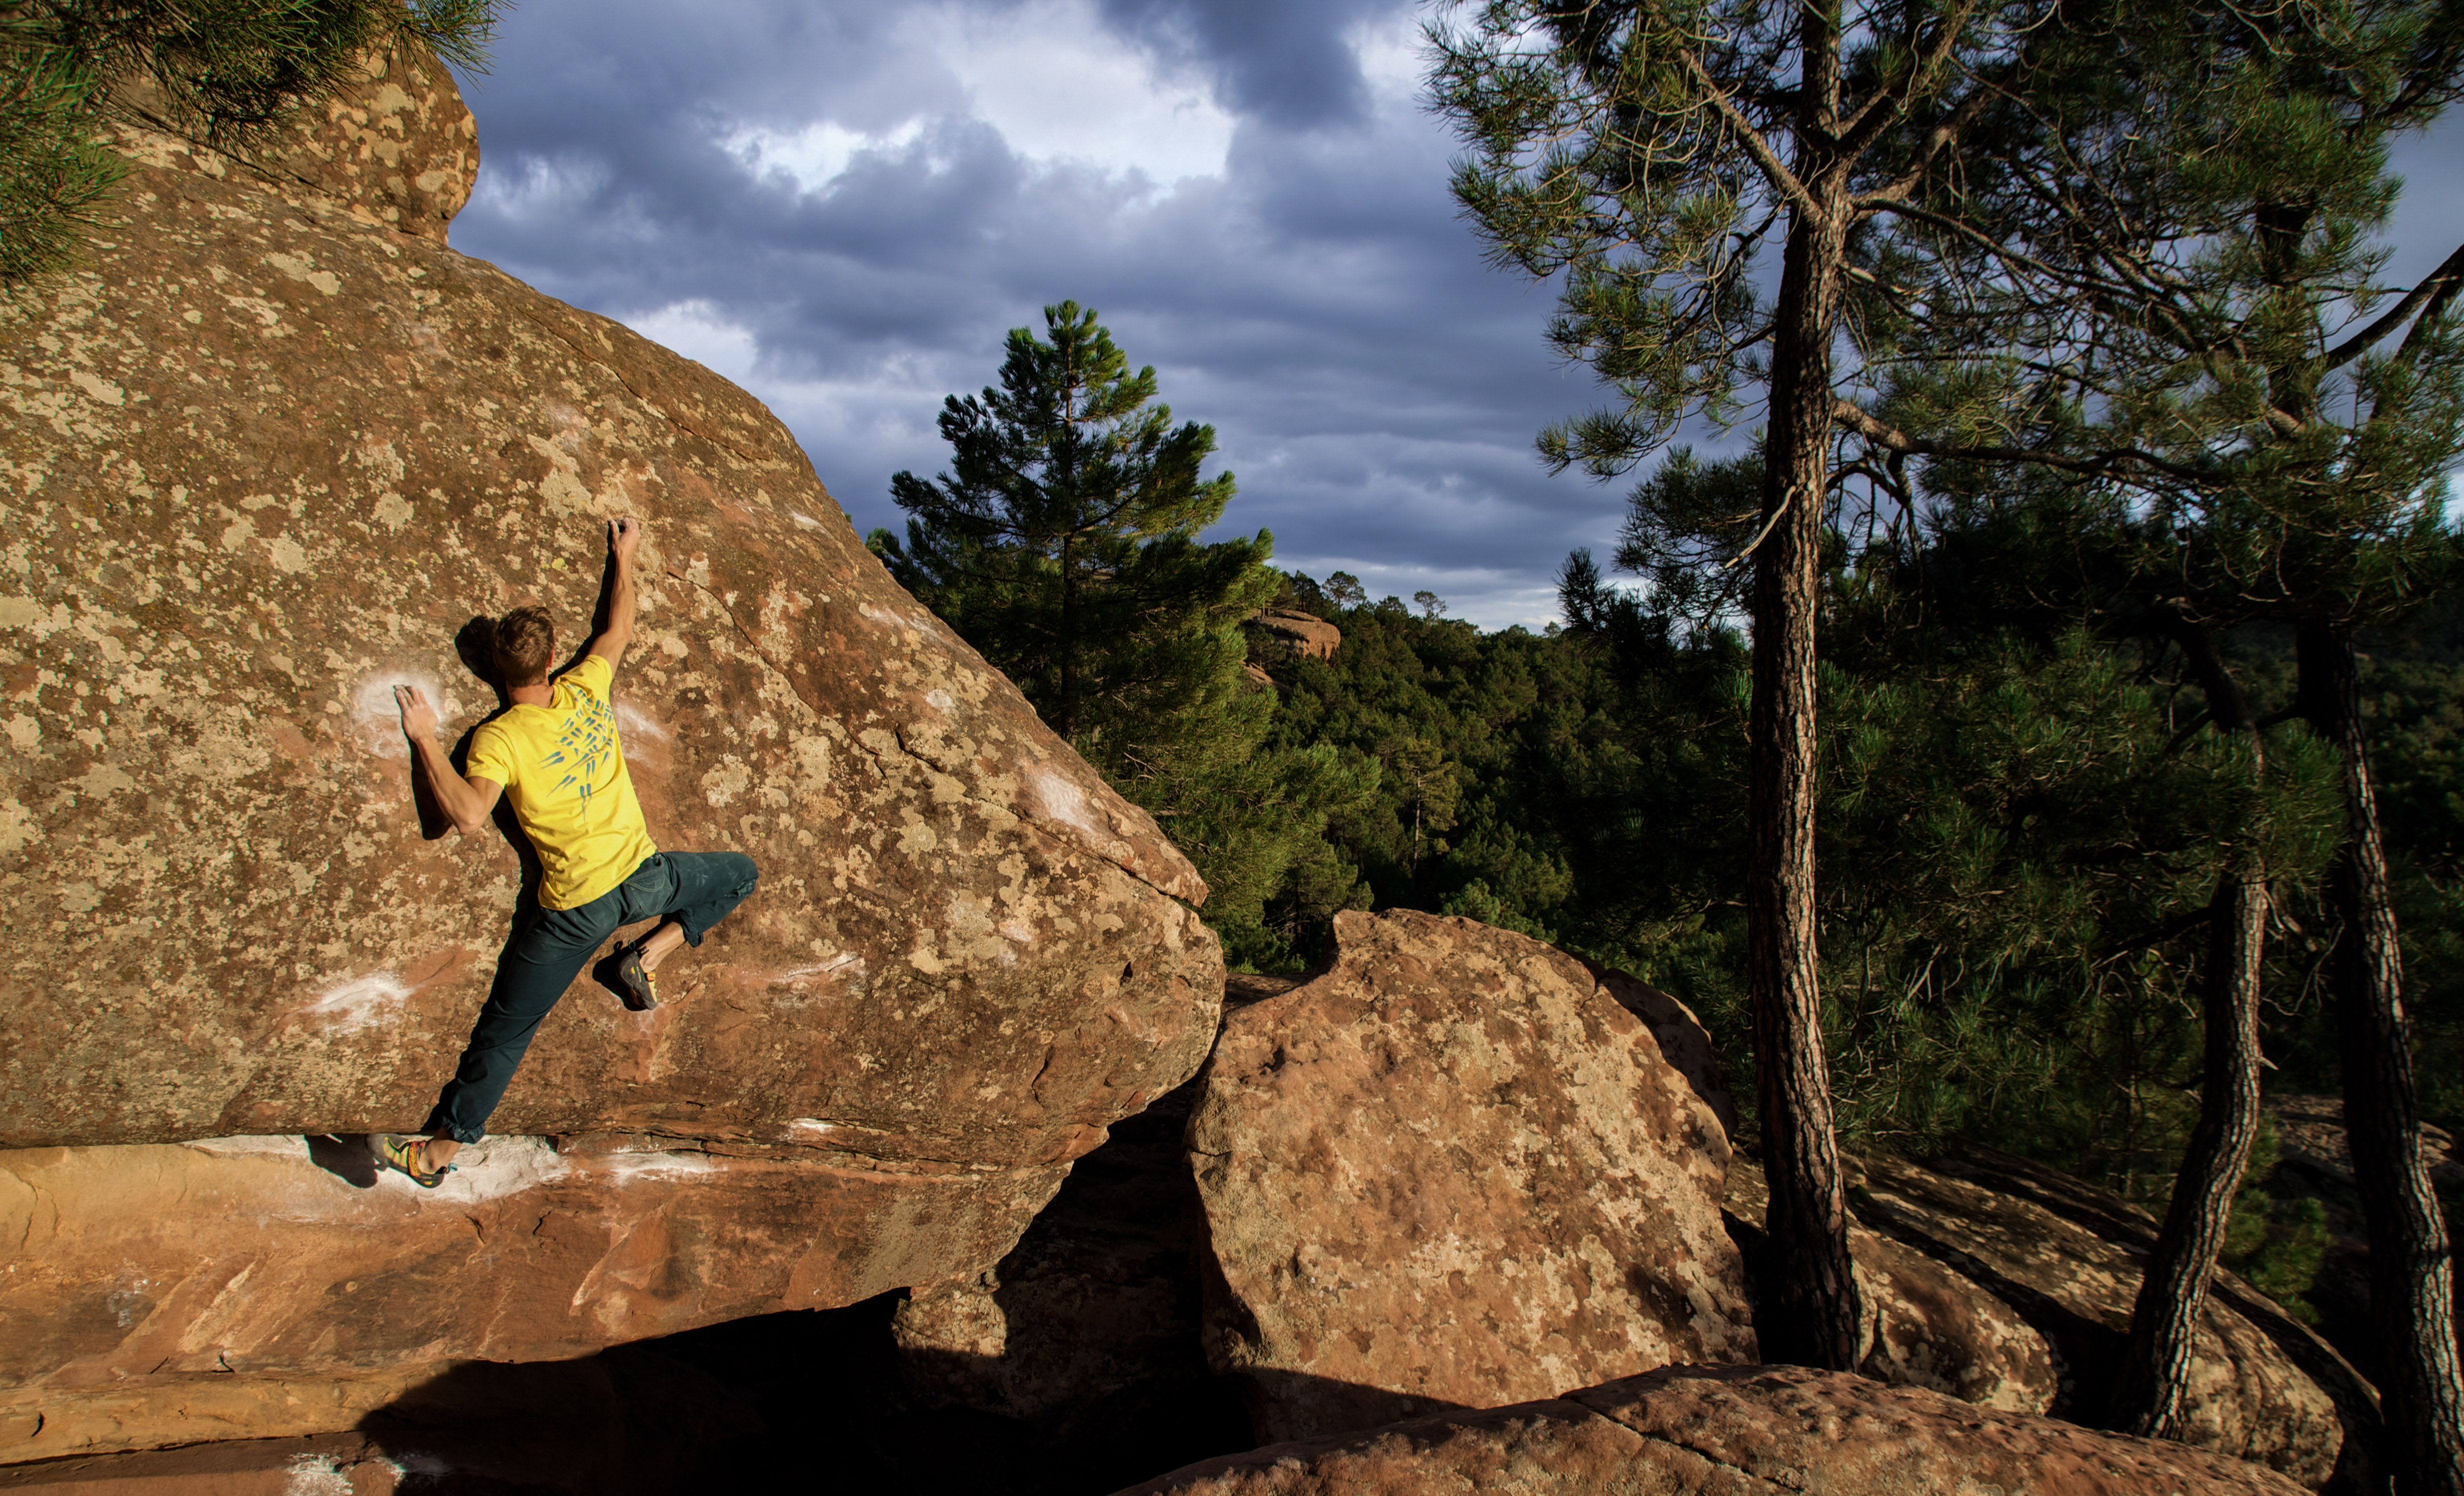 A person in a yellow t-shirt bouldering in Albarracin